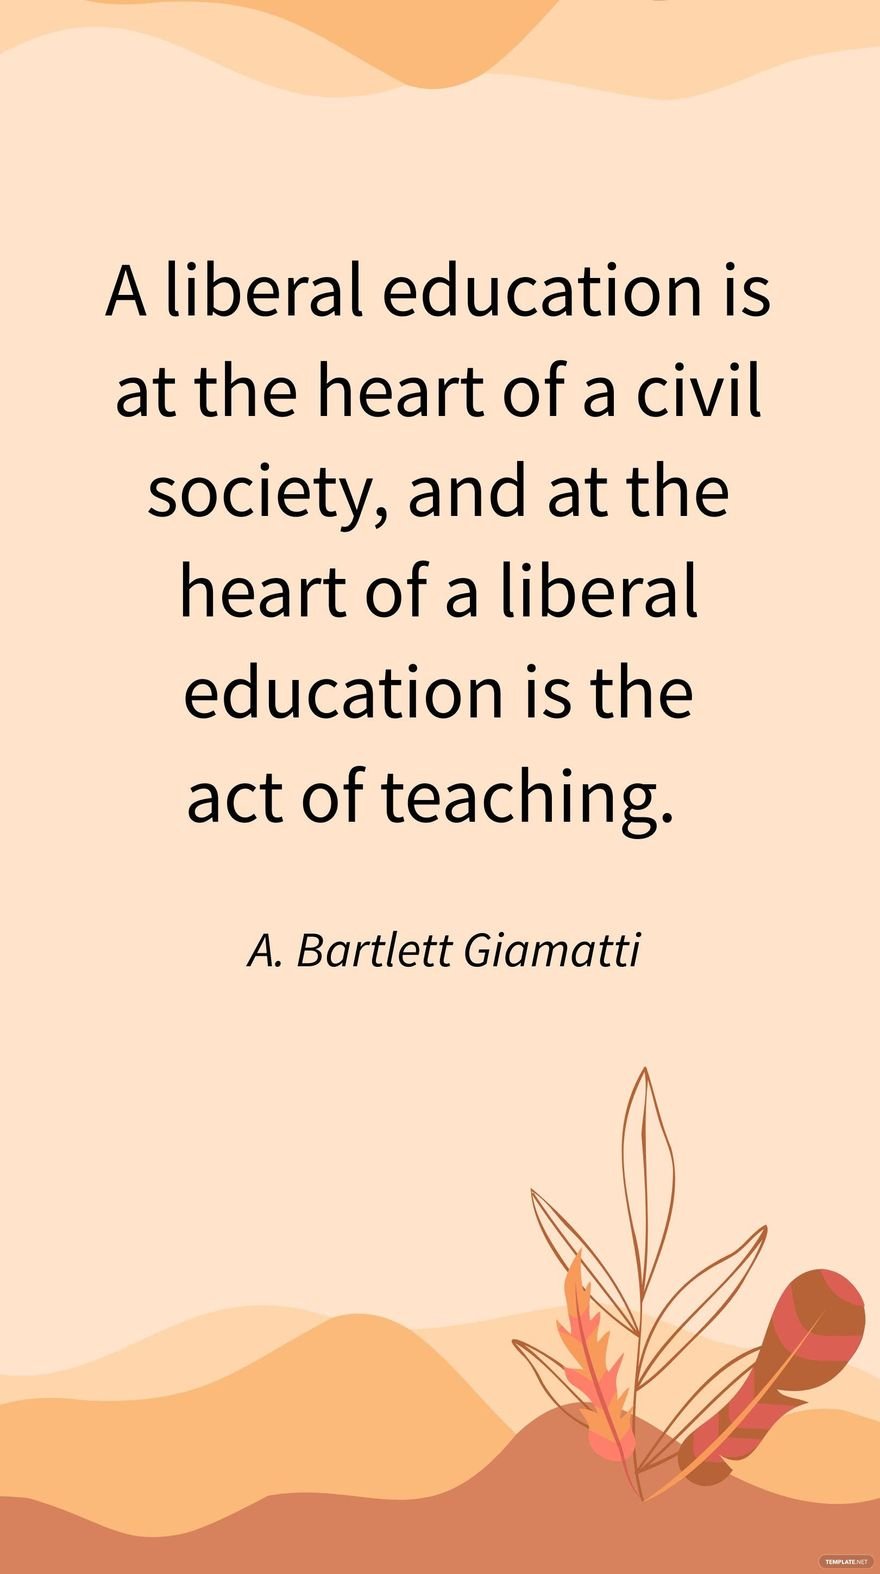 Free A. Bartlett Giamatti - A liberal education is at the heart of a civil society, and at the heart of a liberal education is the act of teaching.